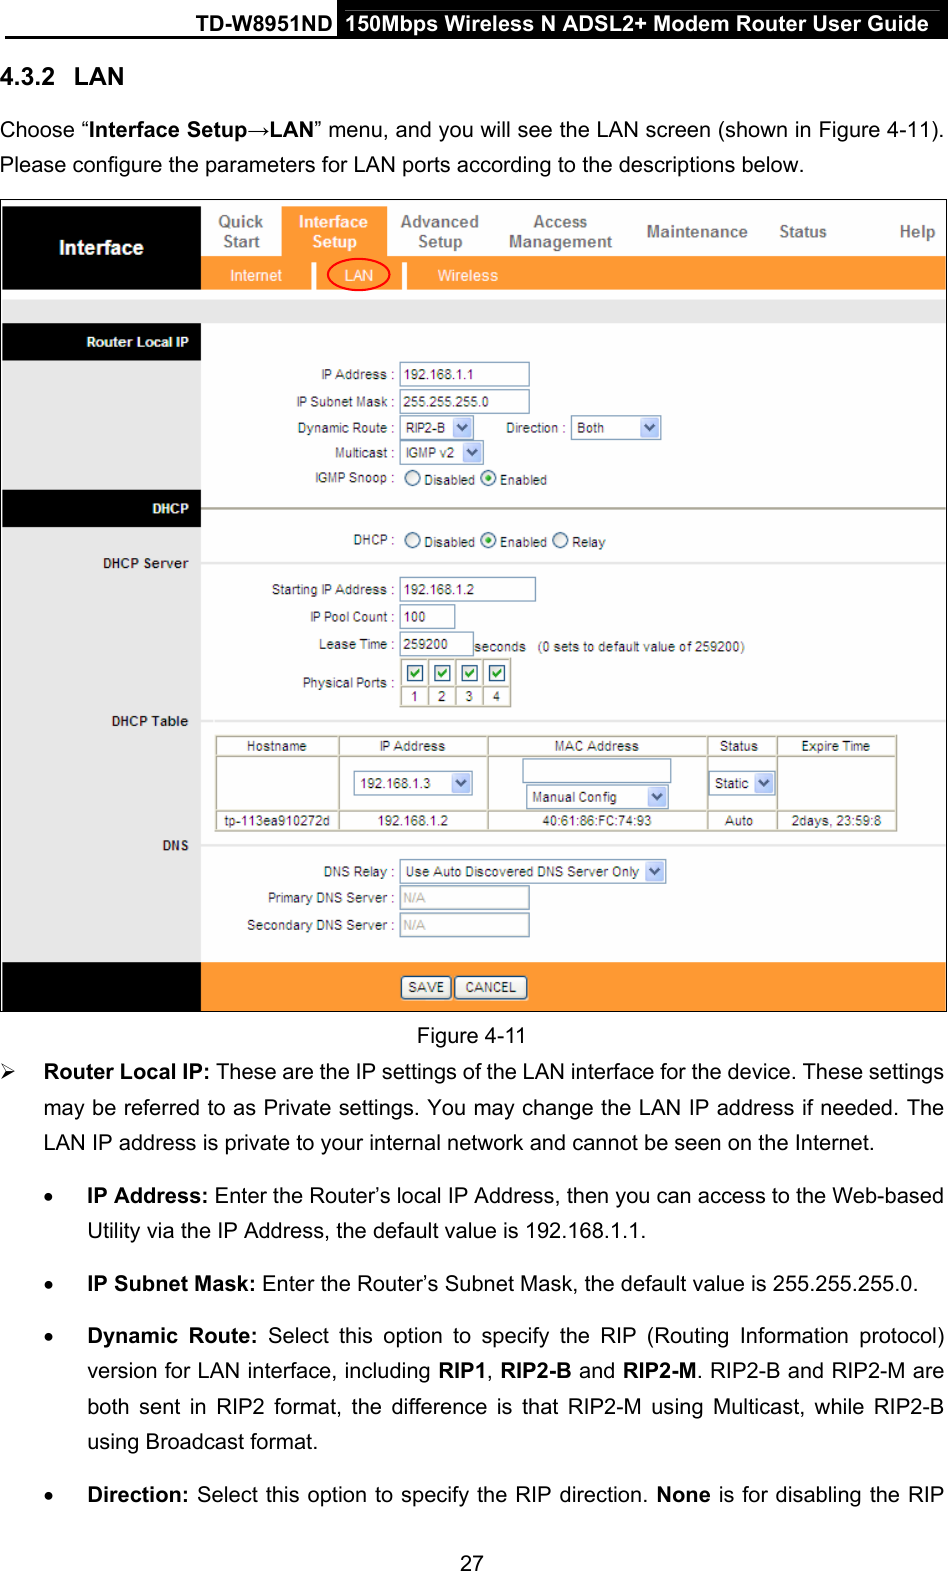 TD-W8951ND  150Mbps Wireless N ADSL2+ Modem Router User Guide 4.3.2  LAN Choose “Interface Setup→LAN” menu, and you will see the LAN screen (shown in Figure 4-11). Please configure the parameters for LAN ports according to the descriptions below.  Figure 4-11 ¾ Router Local IP: These are the IP settings of the LAN interface for the device. These settings may be referred to as Private settings. You may change the LAN IP address if needed. The LAN IP address is private to your internal network and cannot be seen on the Internet. • IP Address: Enter the Router’s local IP Address, then you can access to the Web-based Utility via the IP Address, the default value is 192.168.1.1. • IP Subnet Mask: Enter the Router’s Subnet Mask, the default value is 255.255.255.0. • Dynamic Route: Select this option to specify the RIP (Routing Information protocol) version for LAN interface, including RIP1, RIP2-B and RIP2-M. RIP2-B and RIP2-M are both sent in RIP2 format, the difference is that RIP2-M using Multicast, while RIP2-B using Broadcast format. • Direction: Select this option to specify the RIP direction. None is for disabling the RIP 27 